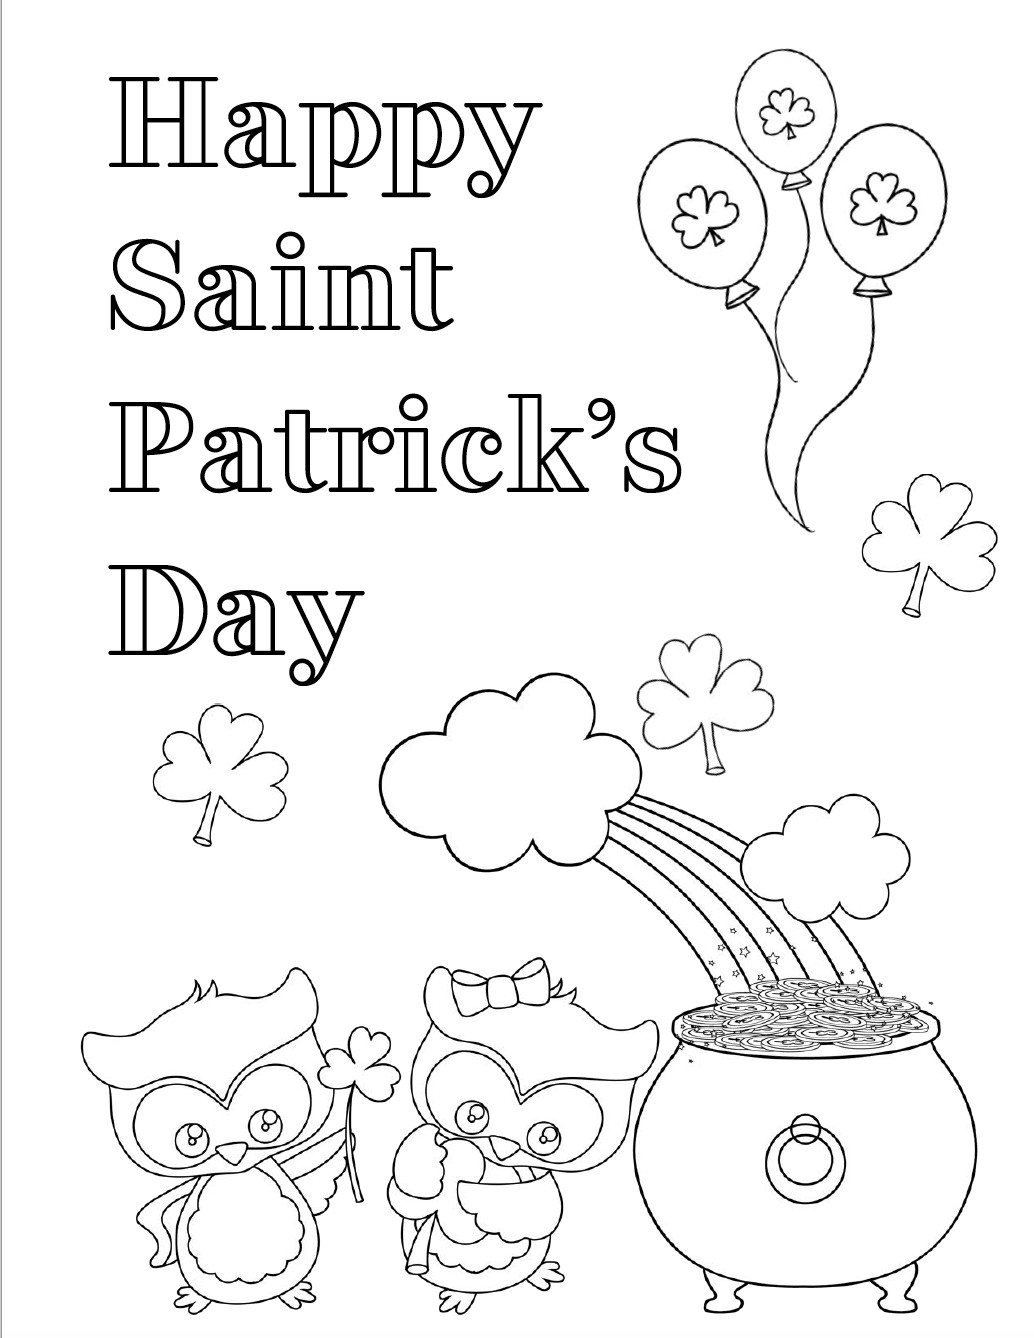 St Patrick'S Day Coloring Pages For Kids
 Free Printable St Patrick’s Day Coloring Pages 4 Designs